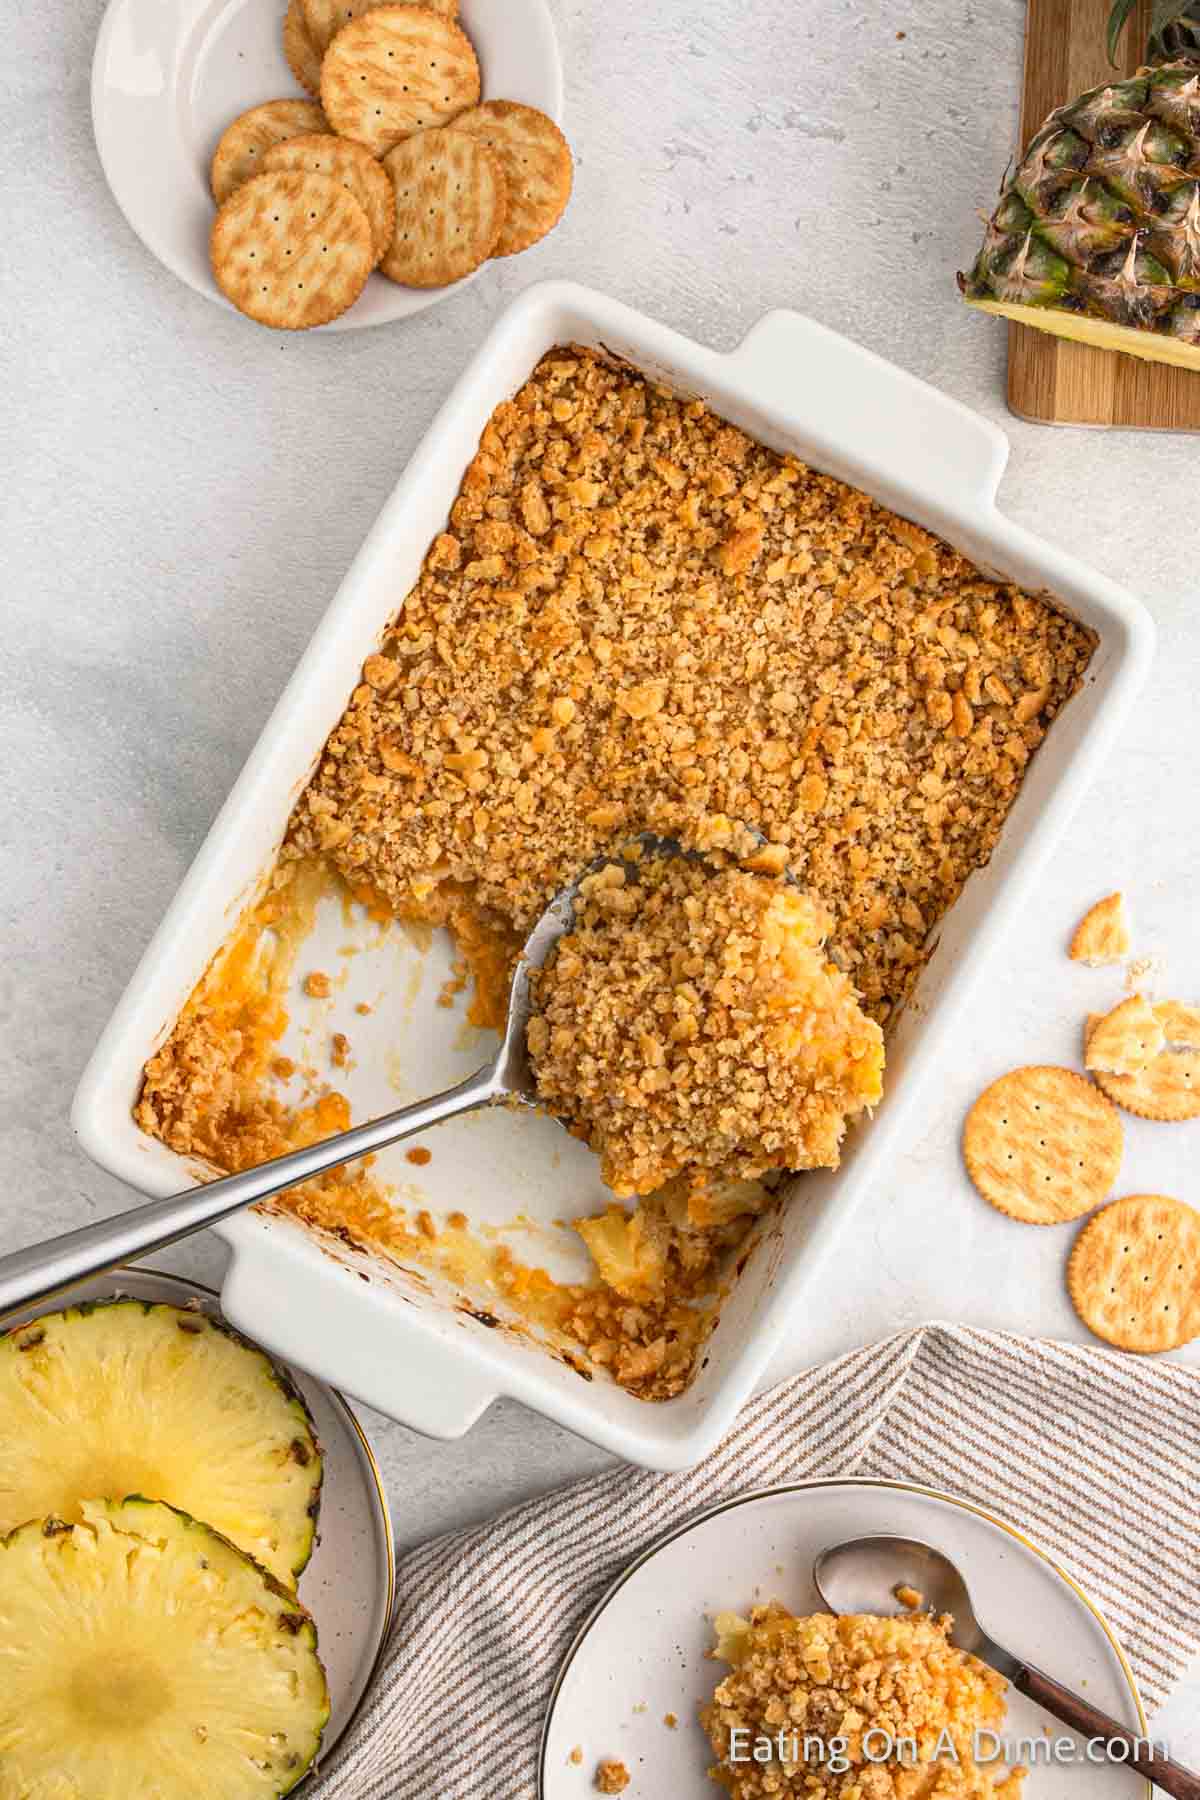 A white rectangular baking dish contains a partially served Pineapple Casserole with a crumb topping. A serving spoon rests inside the dish. Nearby, there are round crackers, fresh pineapple slices on plates, and a small cutting board with additional pineapple.